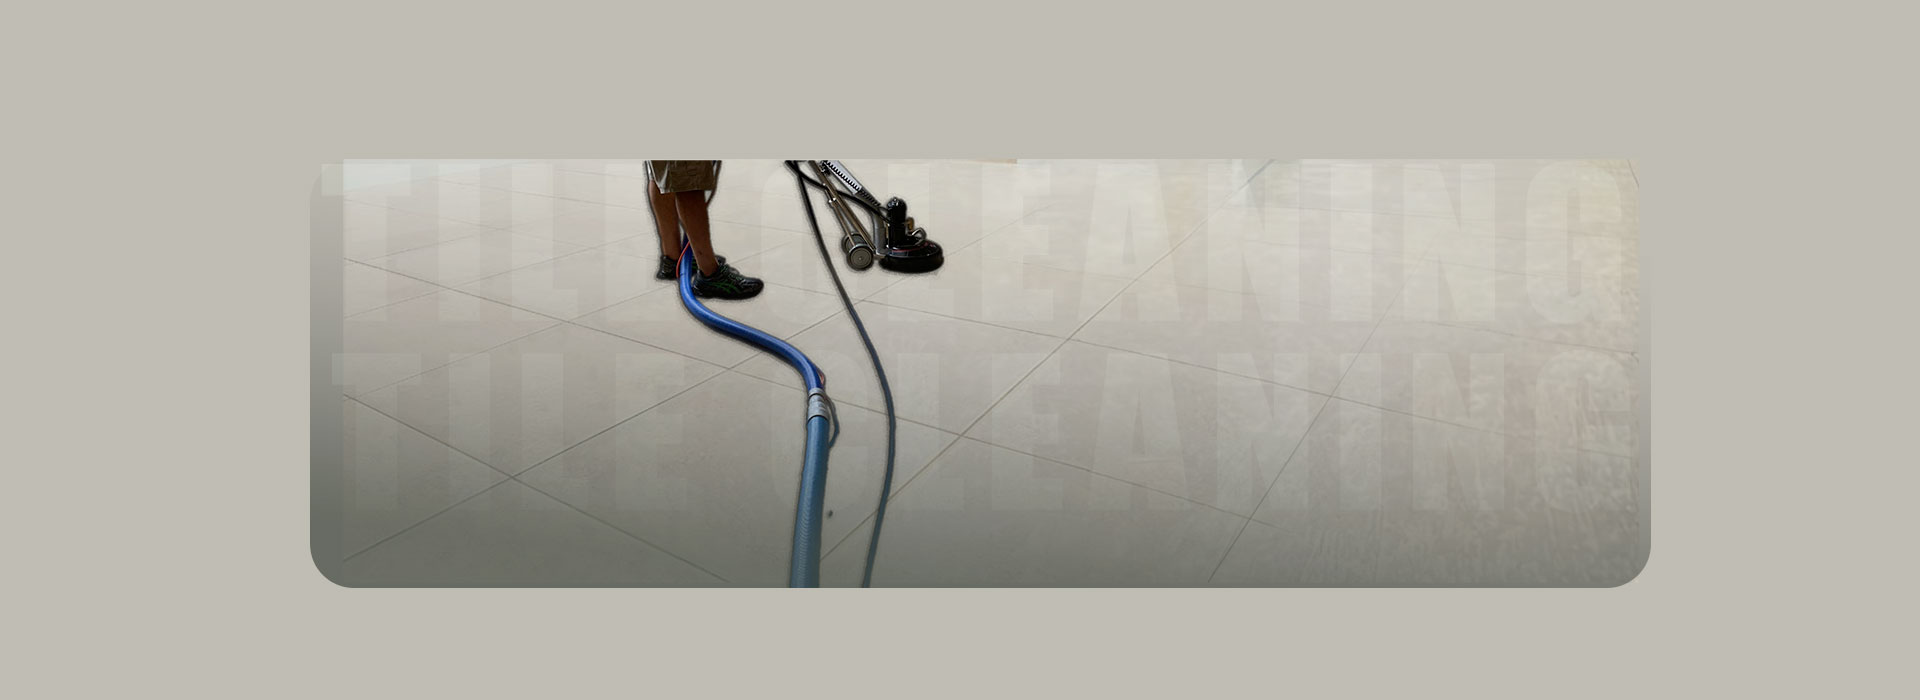 Experience cleaning tiles & grout,professional-grade equipment.